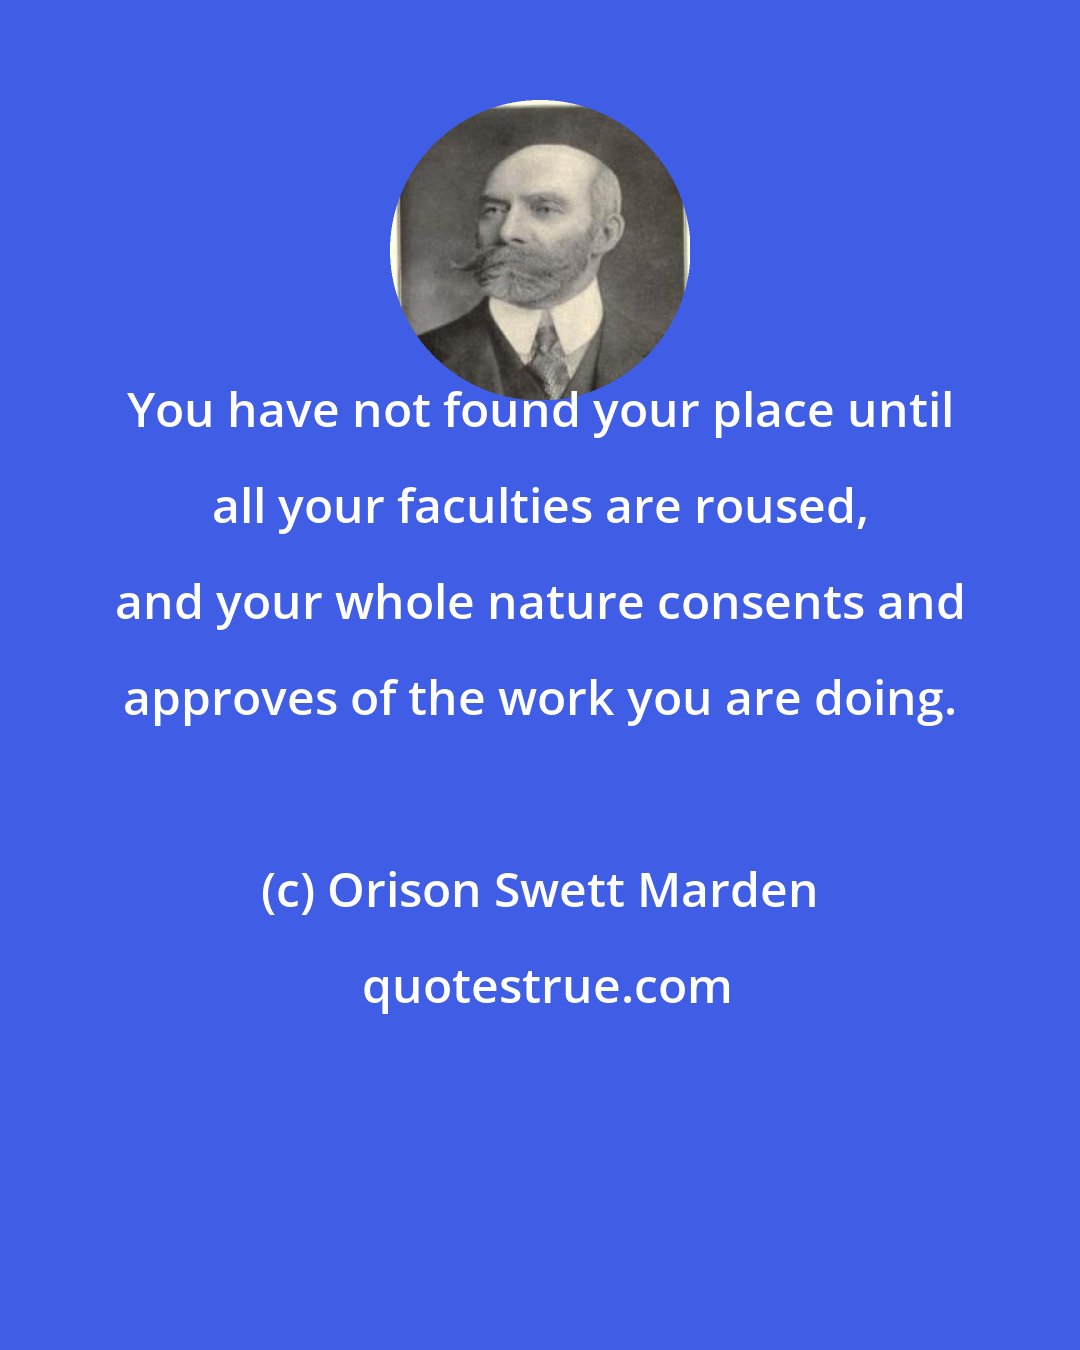 Orison Swett Marden: You have not found your place until all your faculties are roused, and your whole nature consents and approves of the work you are doing.